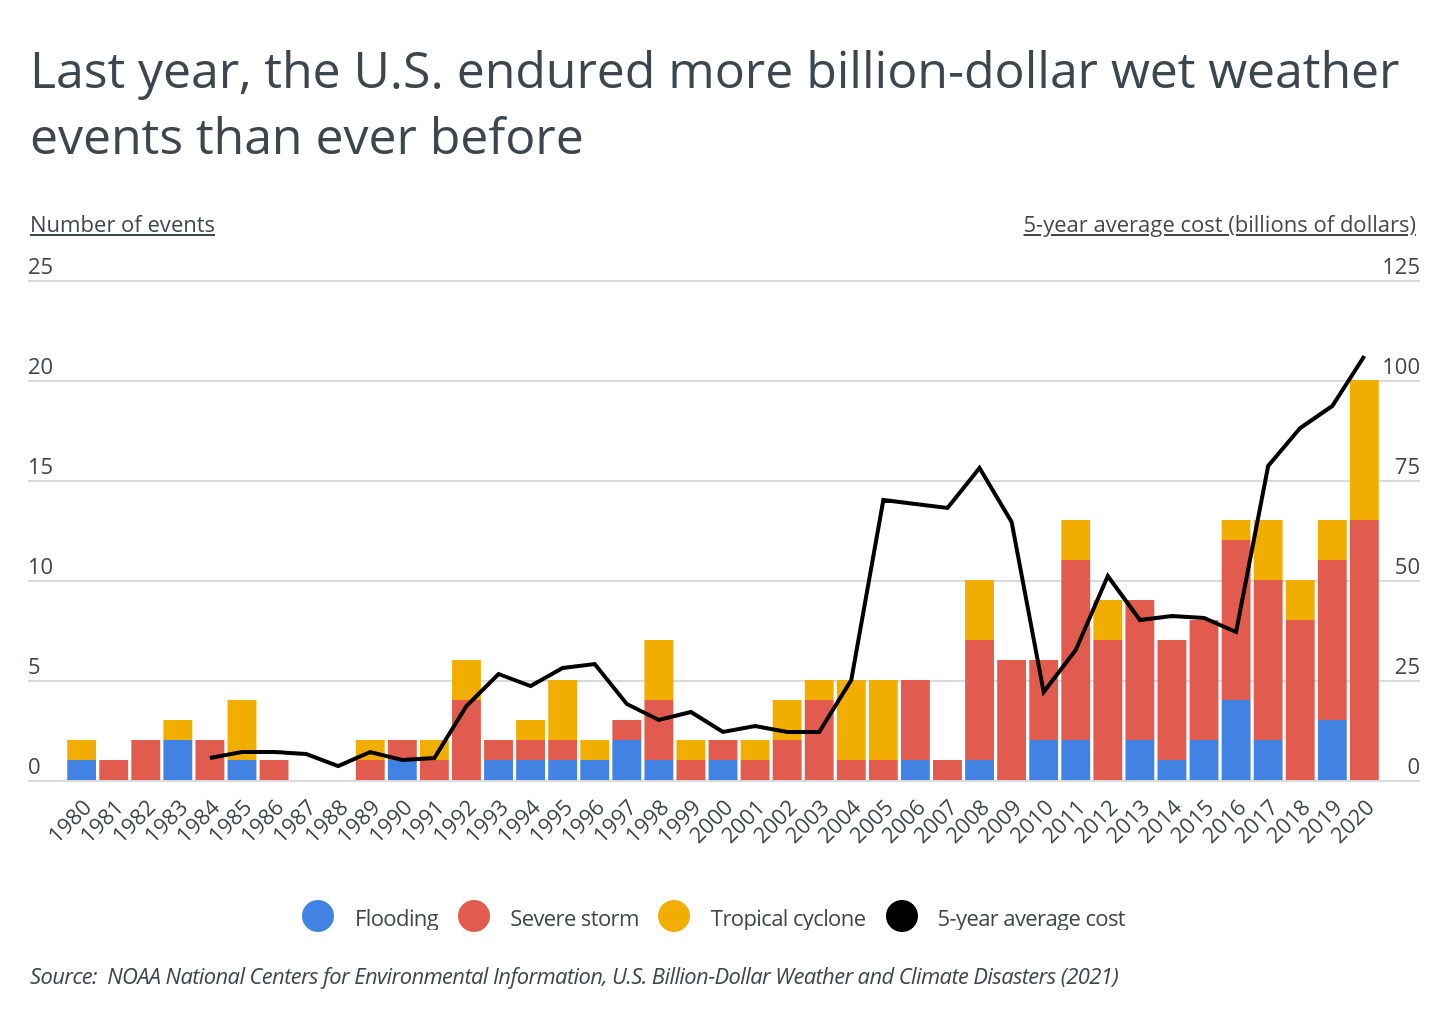 Last year, the US endured more billion-dollar wet weather events than ever before